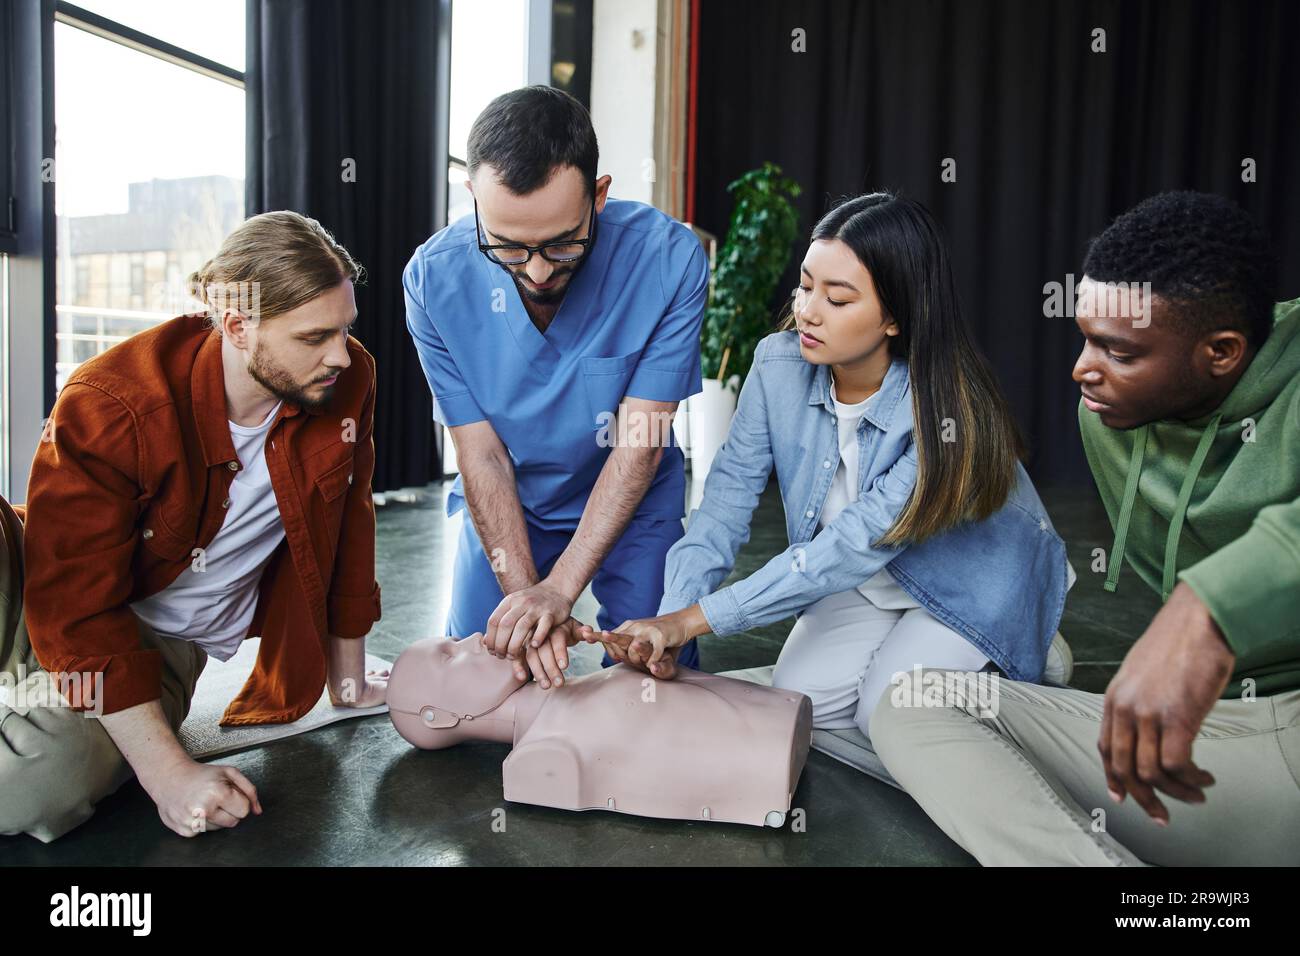 first aid training, medical instructor showing cardiopulmonary resuscitation on CPR manikin near multiethnic participants in training room, effective Stock Photo